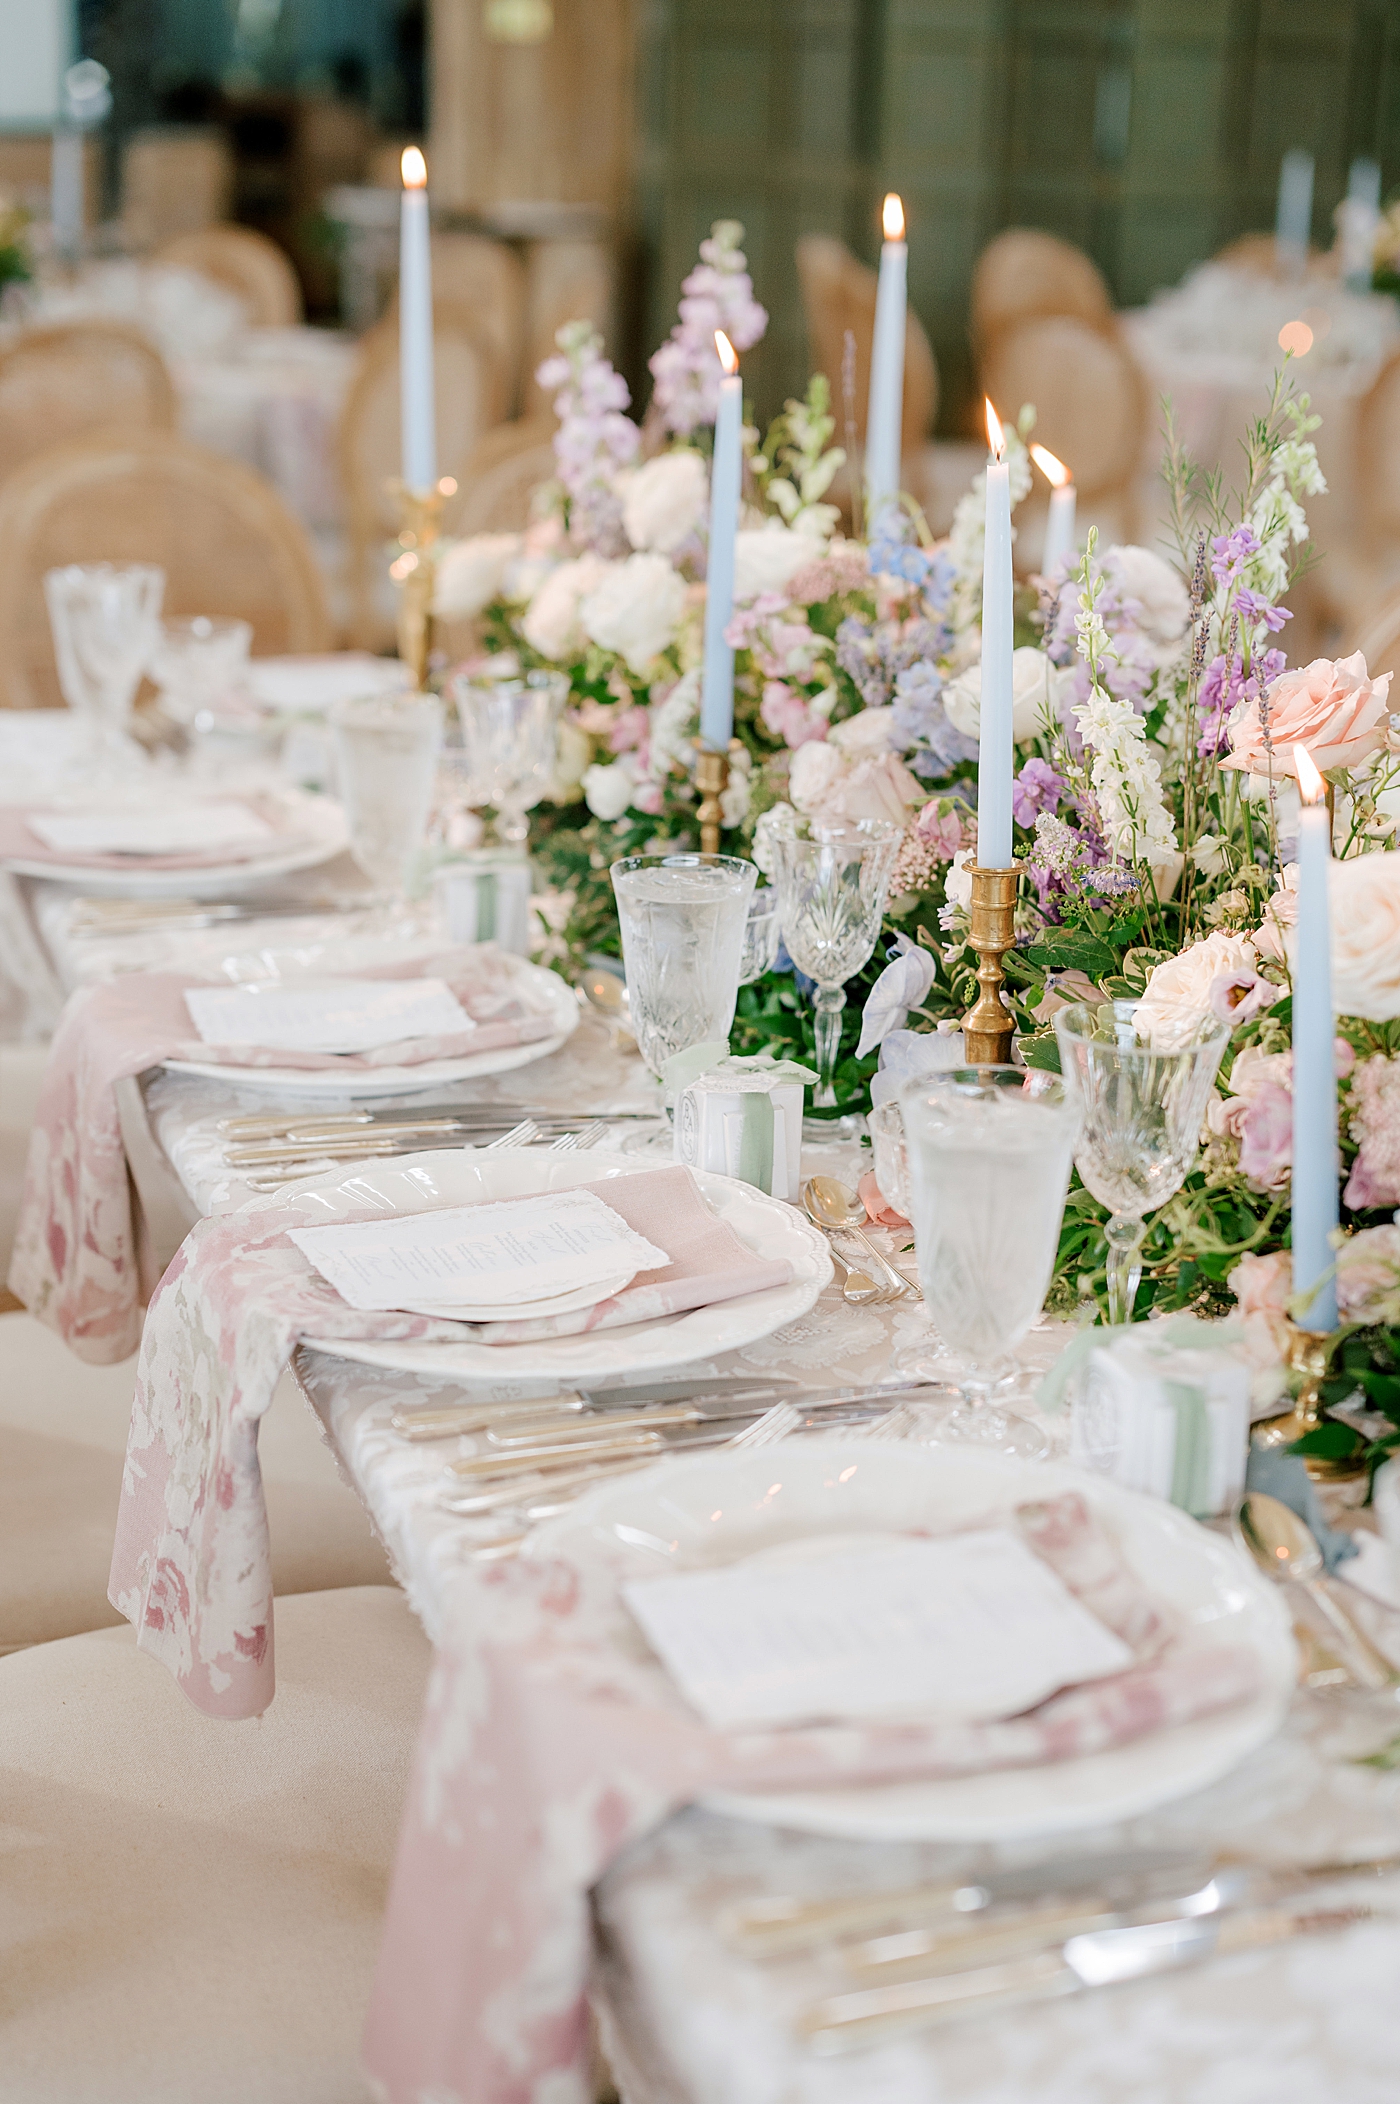 Reception table with tapered candles and wedding flowers | Image by Hope Helmuth Photography